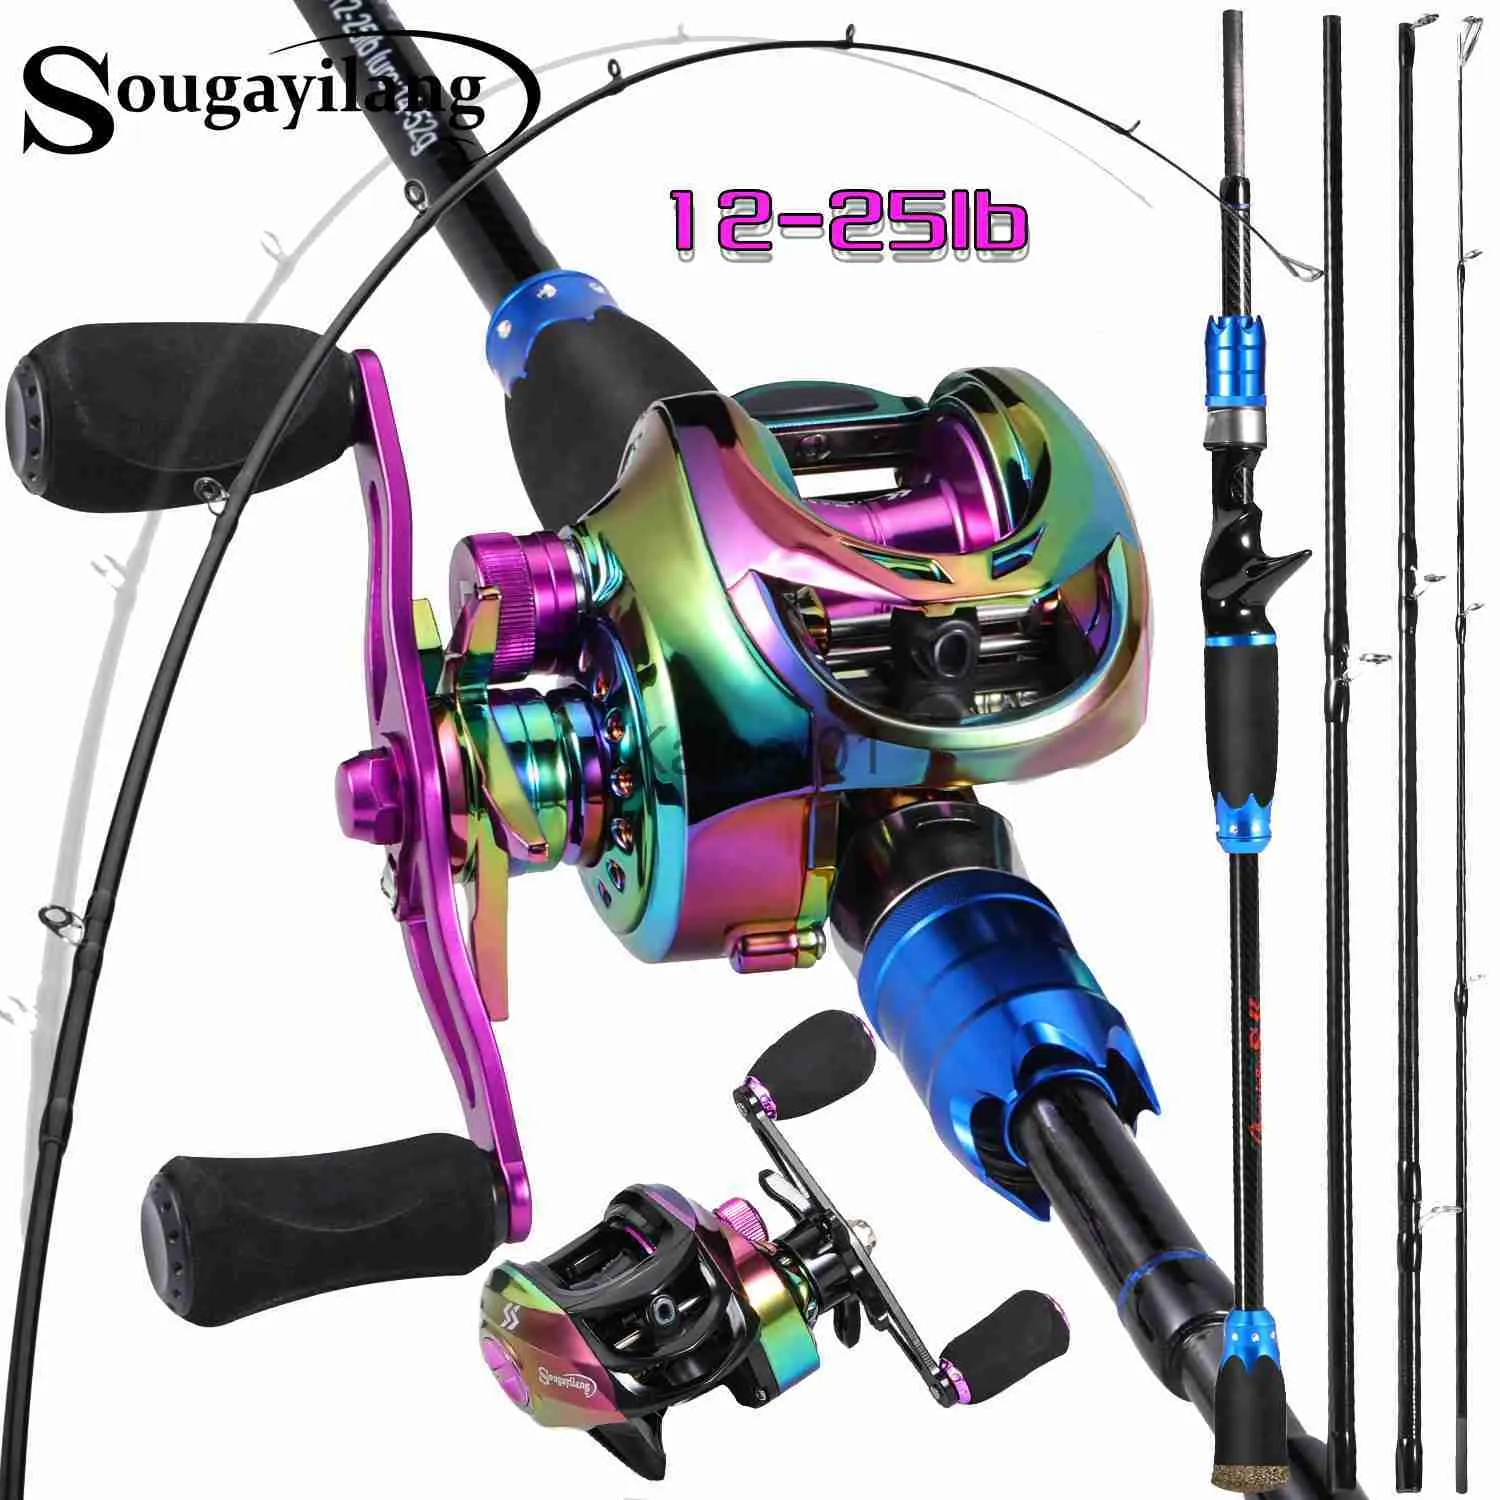 Rod Reel Combo Sougayilang Fishing Rod And Reel Combo 1.8 2.1m 4 Sections Baitcasting  Rod And 6.5 1 7.2 1 Gear Ratio Casting Reel Fishing Pesca X0901 From 31,93  €